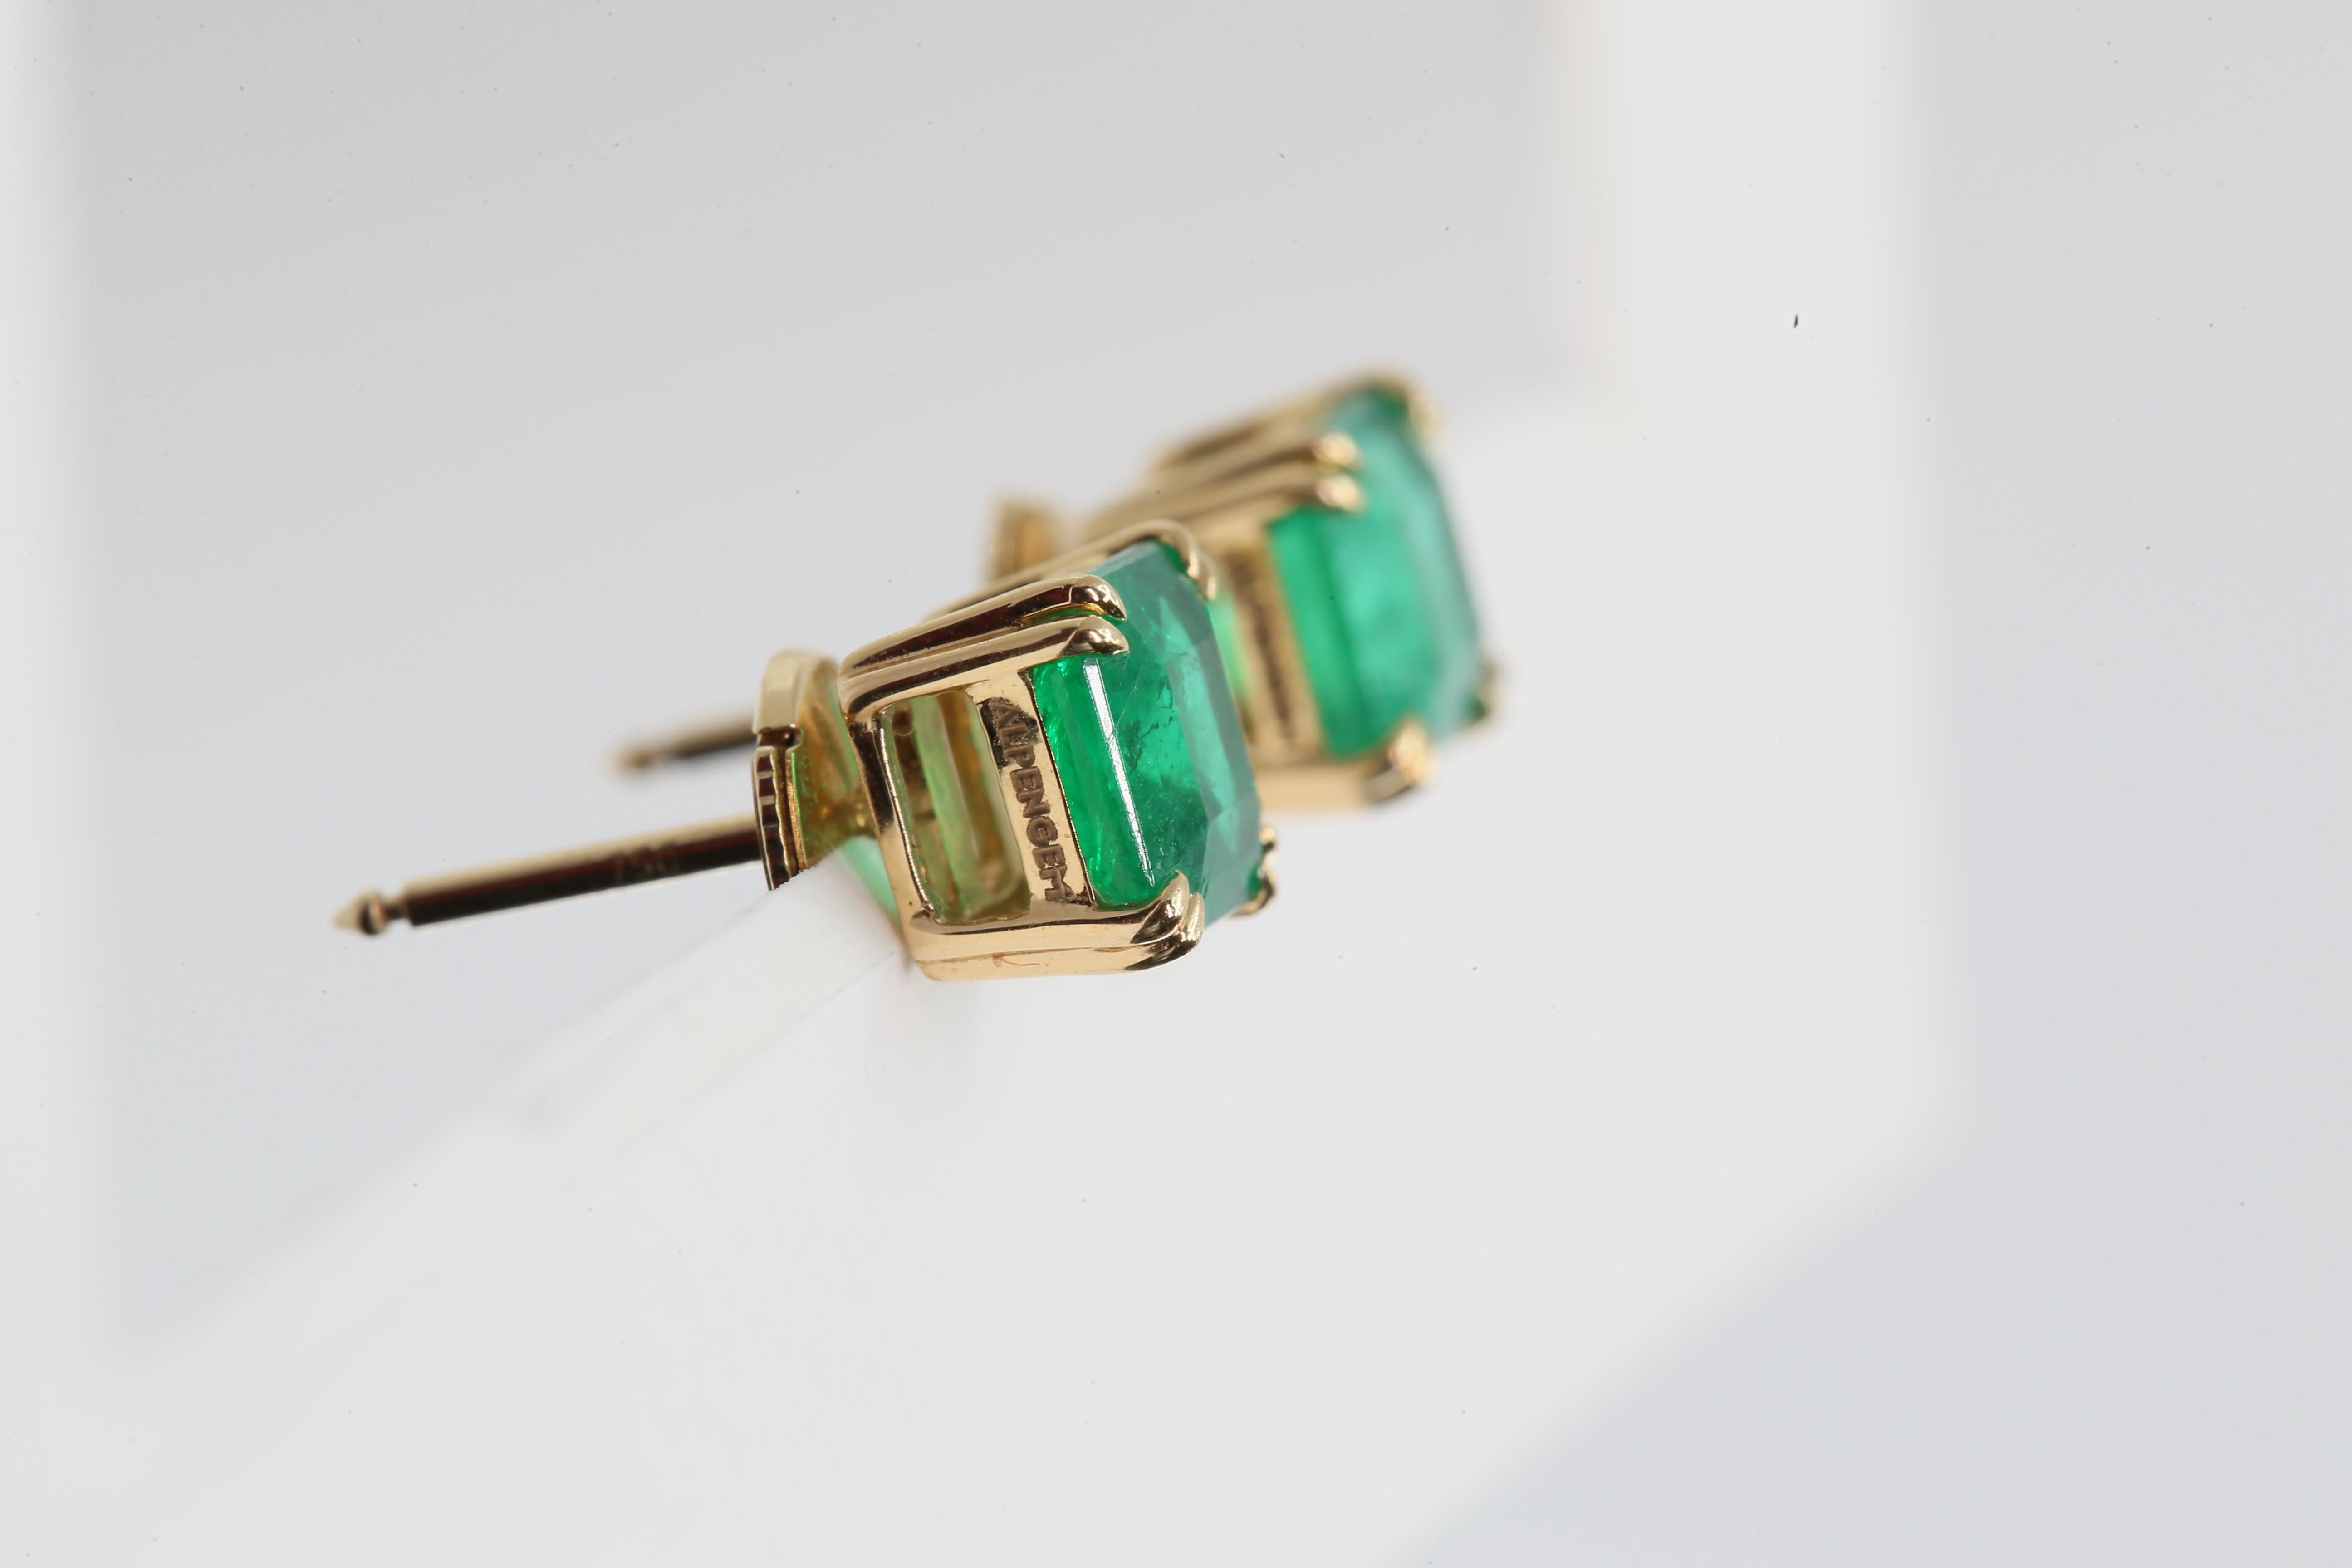 2.8 Carat Natural Emerald Stud Earrings 18k Yellow Gold
Primary Stones: 100% Natural Brazilian Emerald
Average Color/Clarity : Extraordinary Color AAA+ Medium Green/ Clarity, VS
Total Weight Emeralds: Approx. 2.80 Carats
Shape or Cut: Emerald